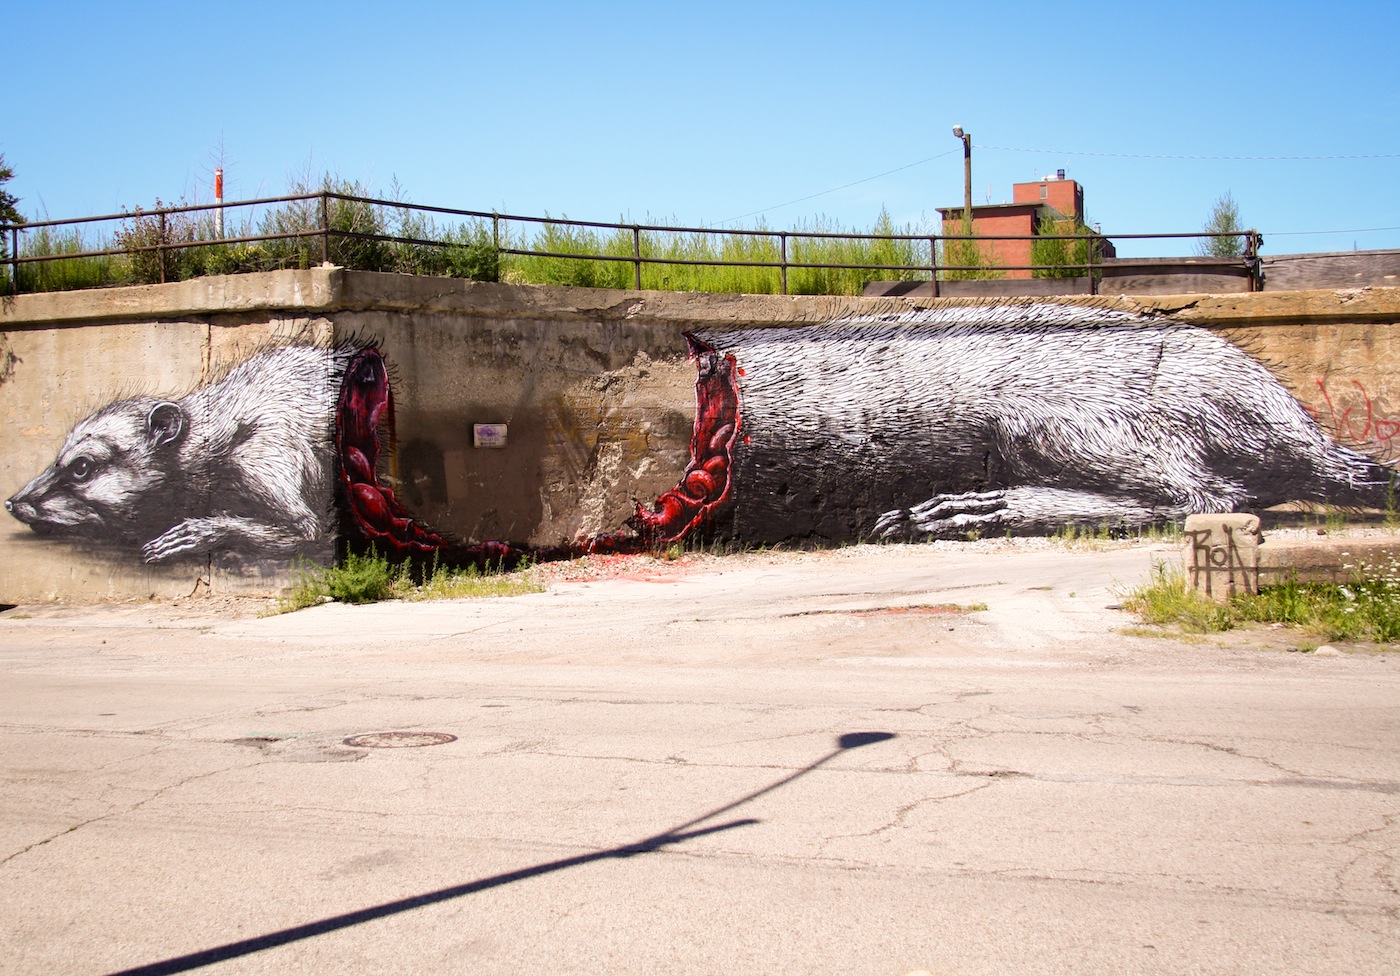 By ROA – In Pilsen, Chicago, USA